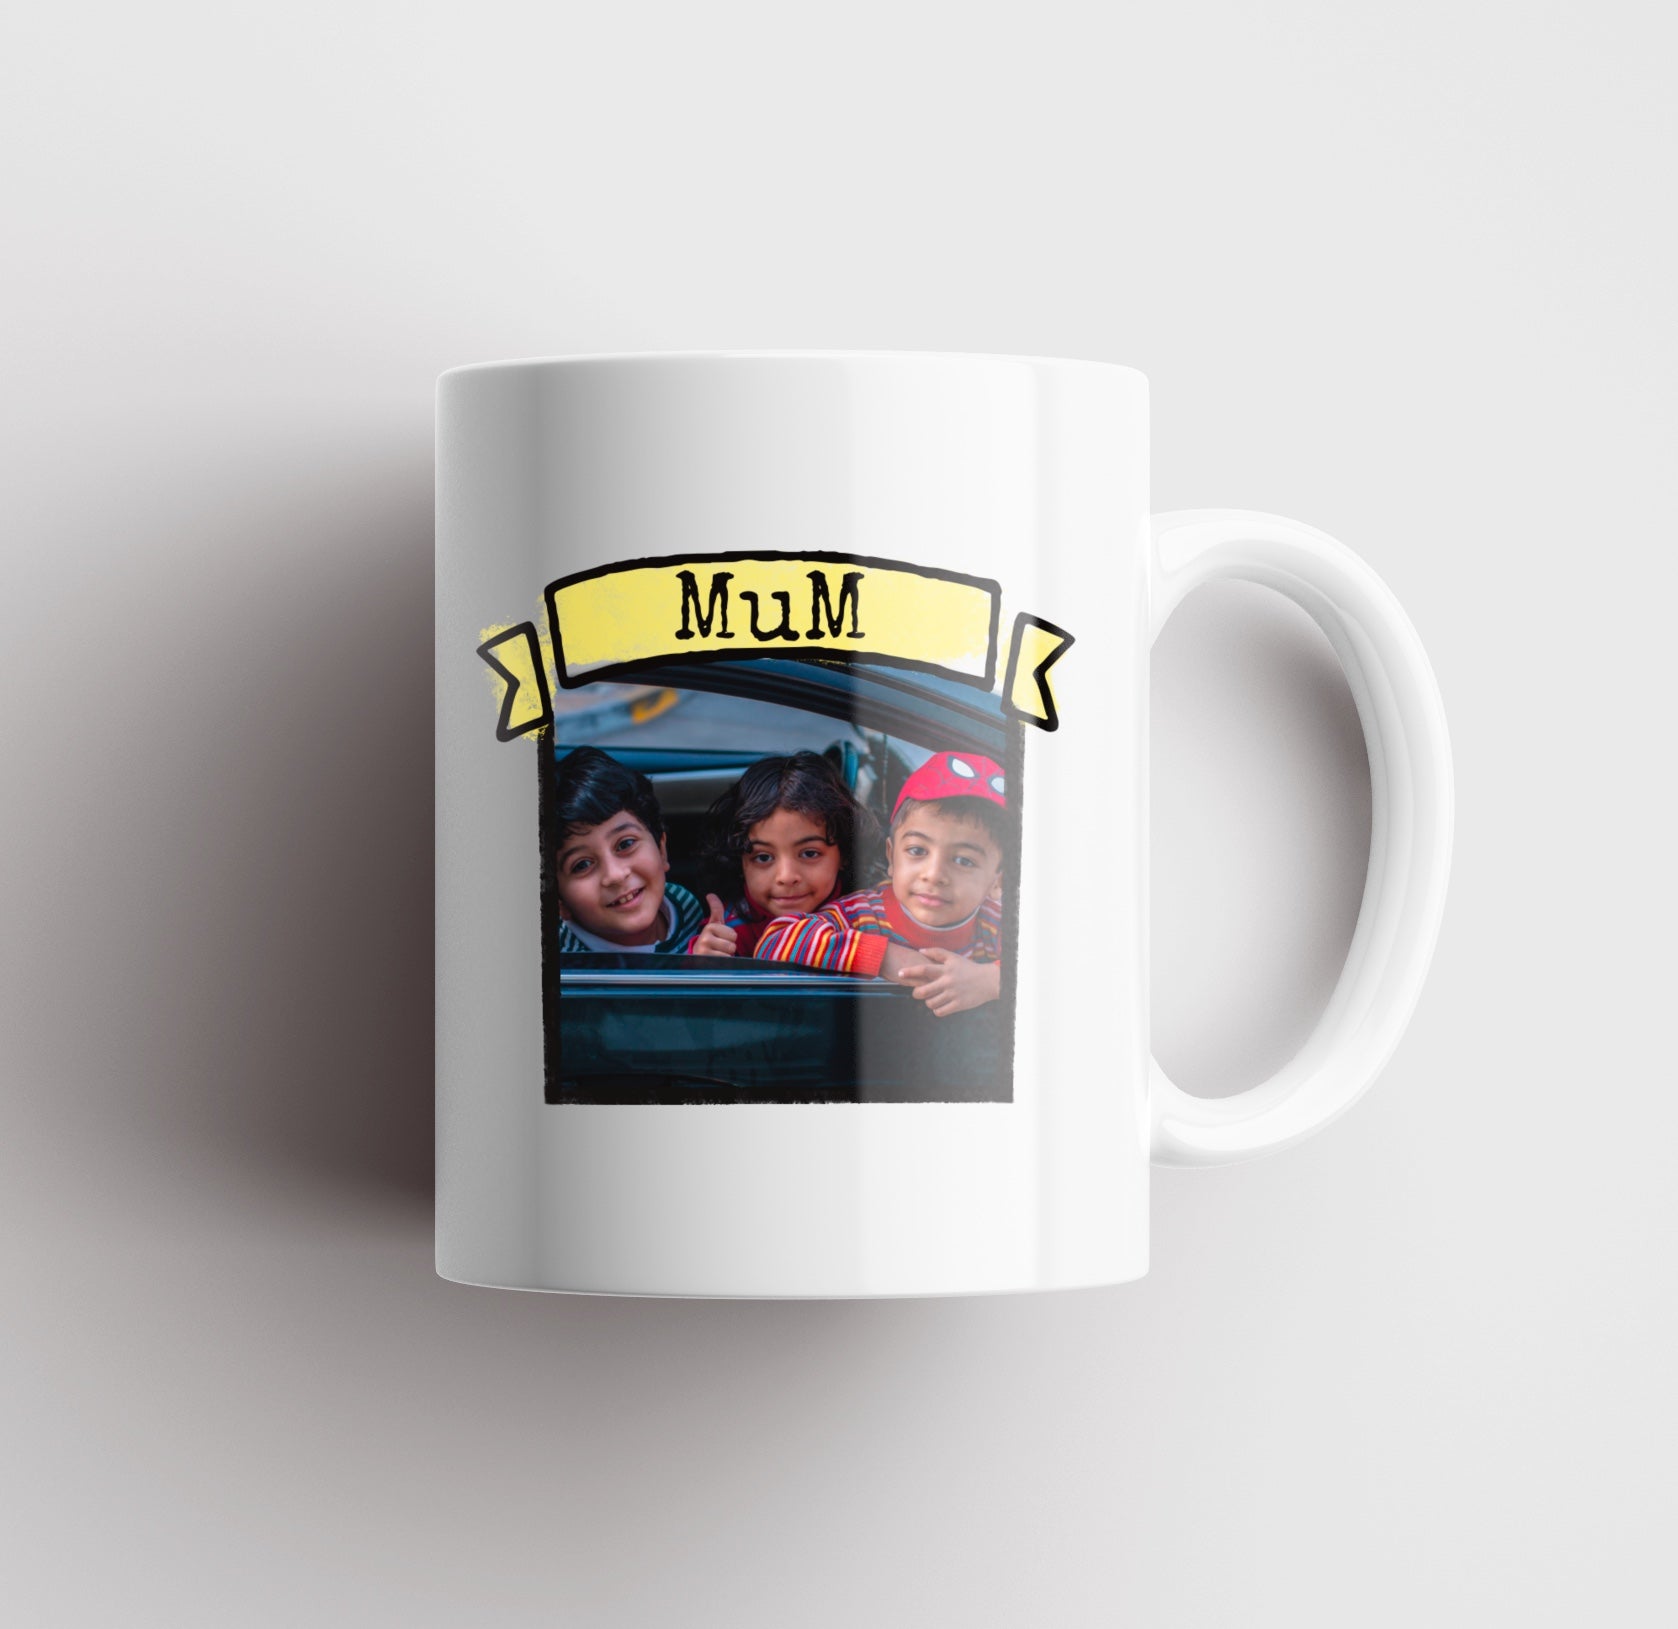 Personalised Mug with Image Mother's Day